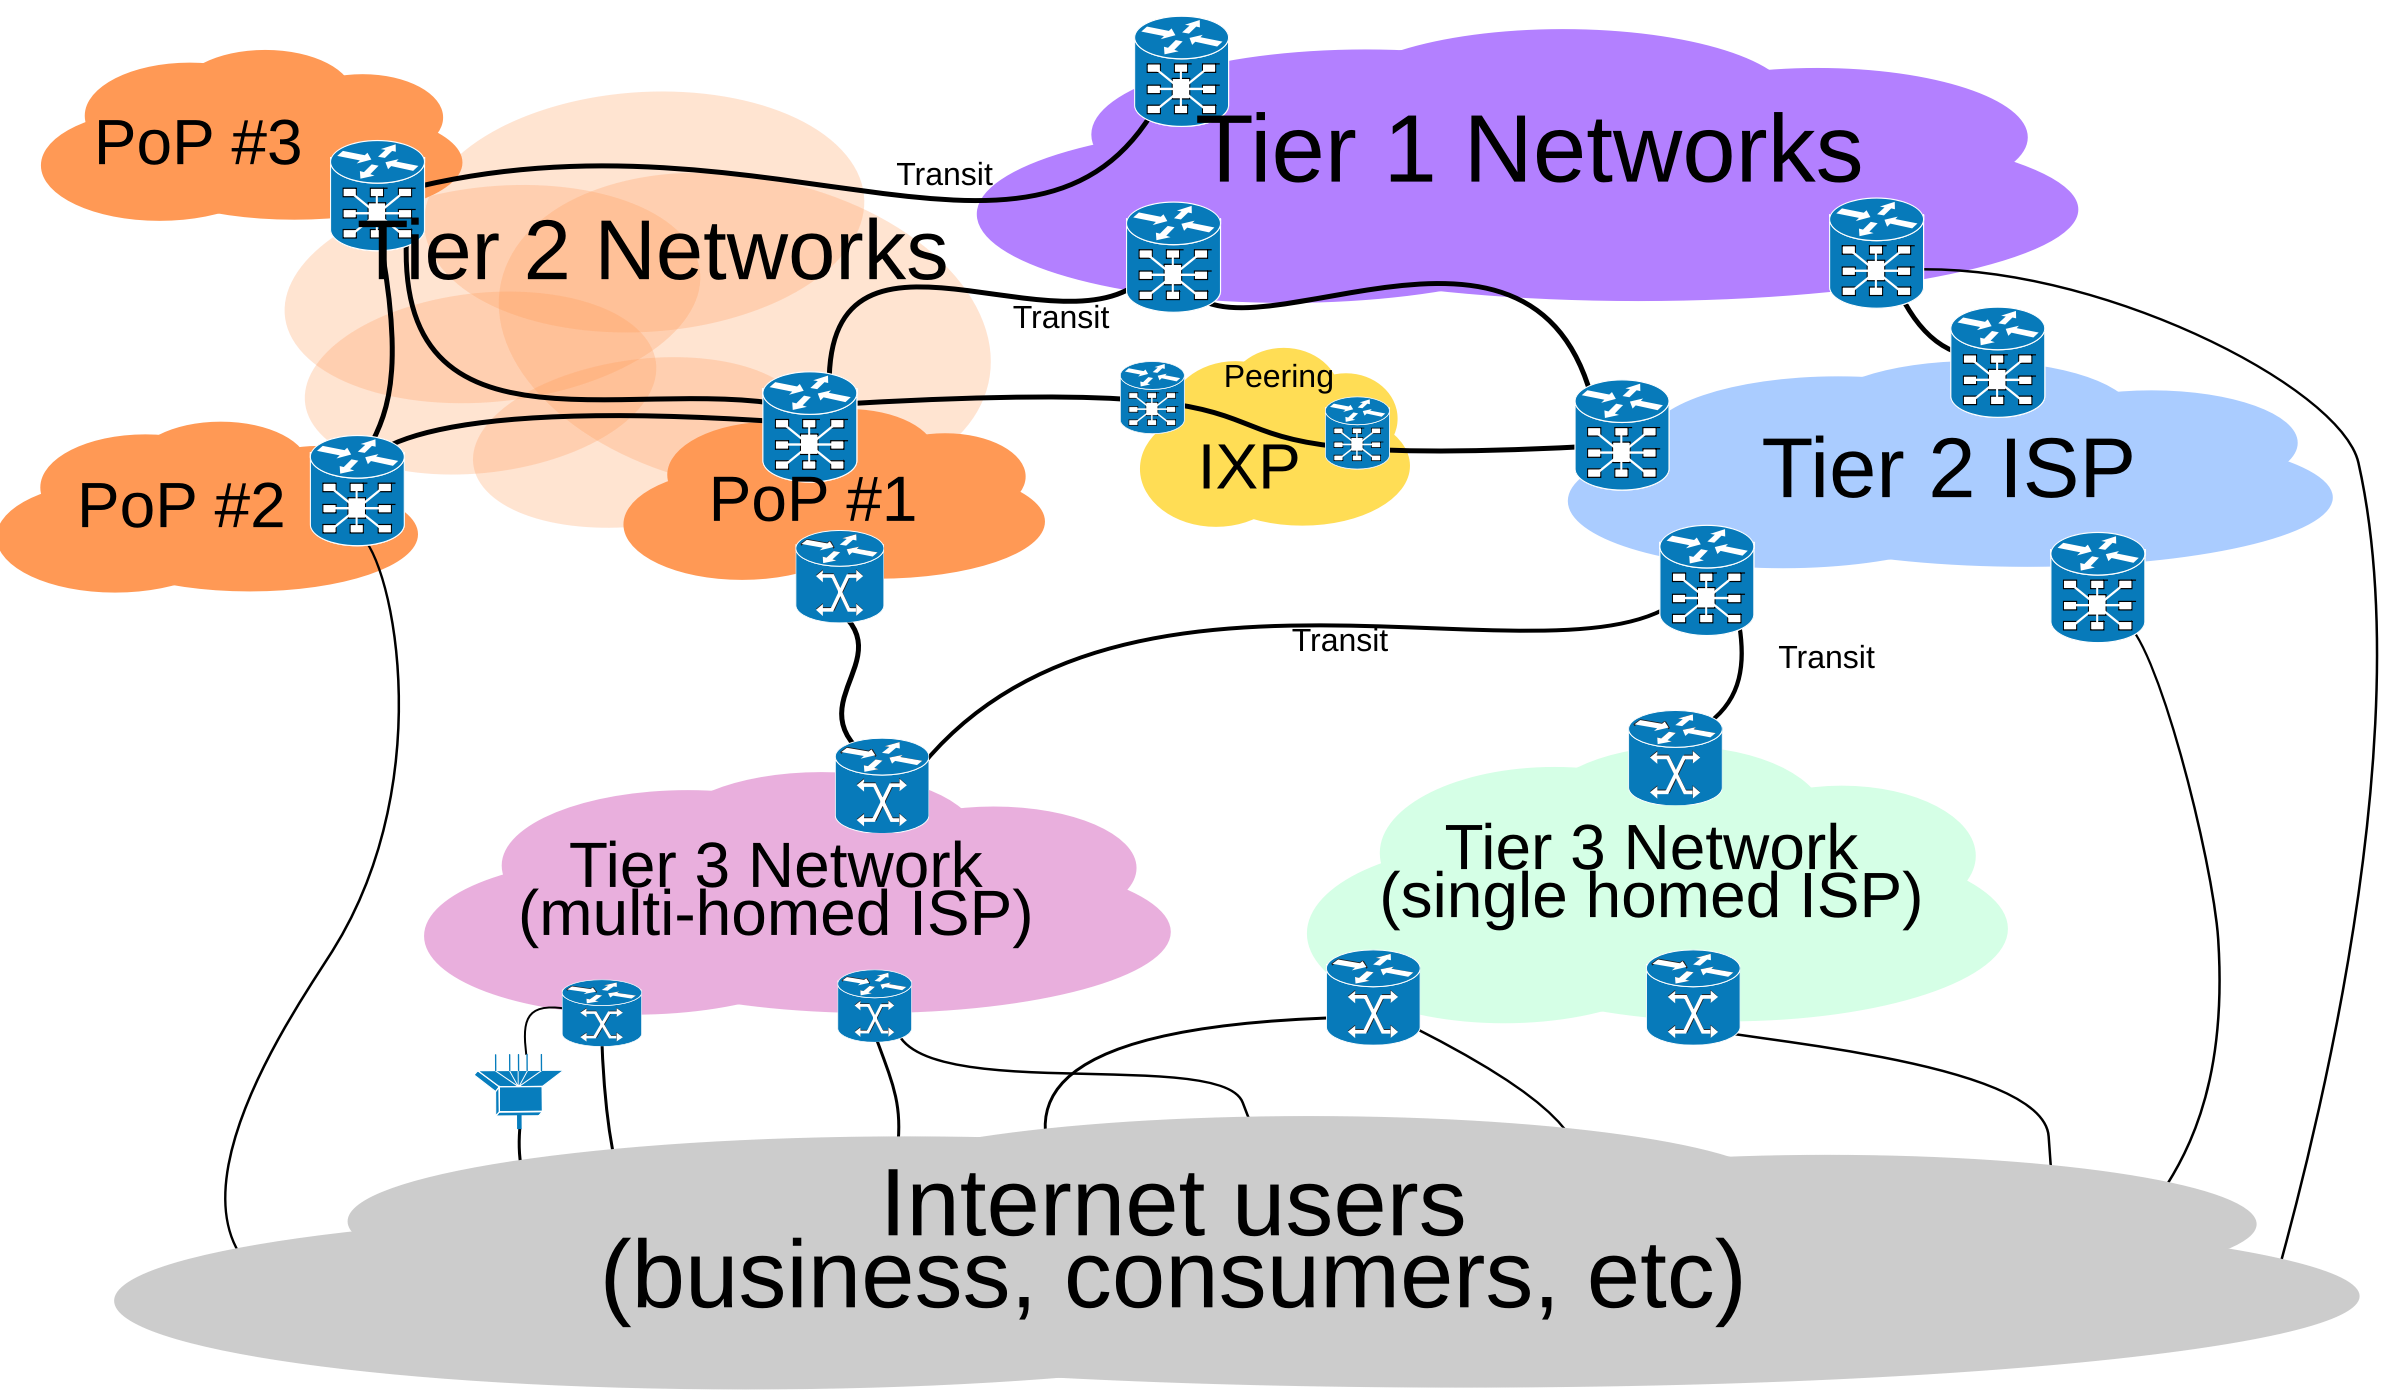 VNS - Tier Networks